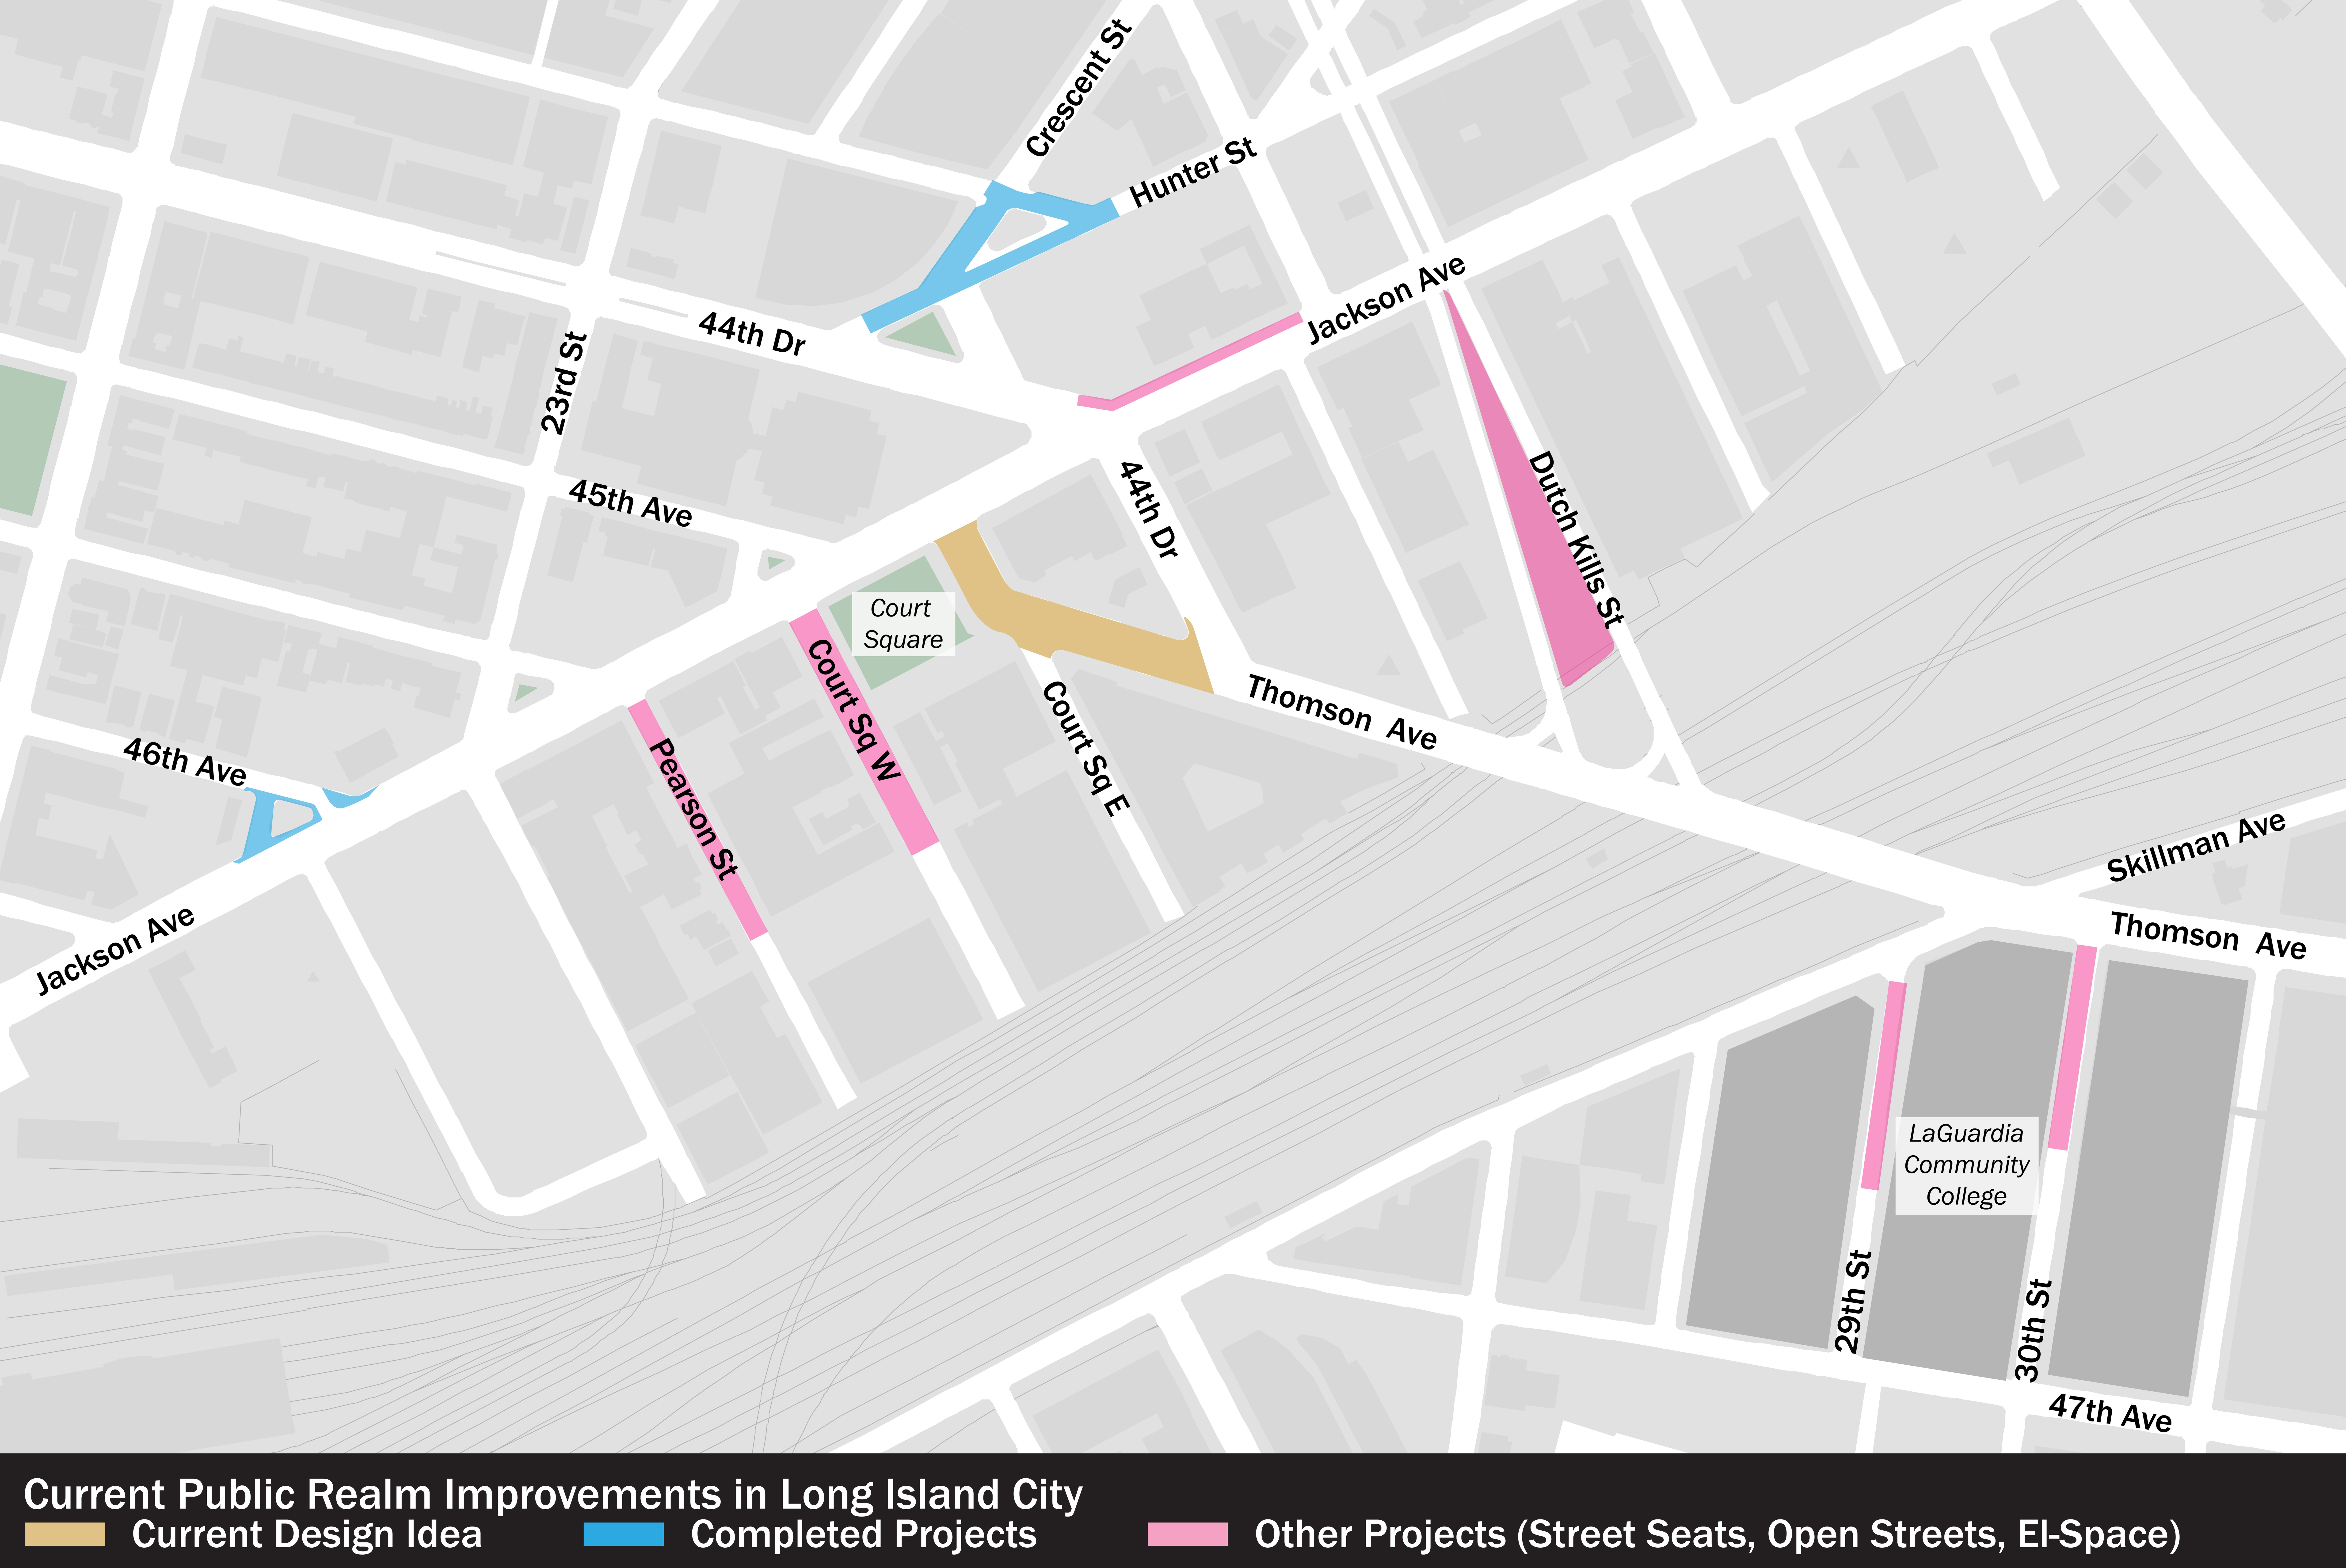 Map showing recent NYC DOT projects across Long Island City, including 46th Avenue and Hunter Street Plazas, Open Streets, Street Seats, and the proposed project area on Thomson Avenue adjacent to Court Square.